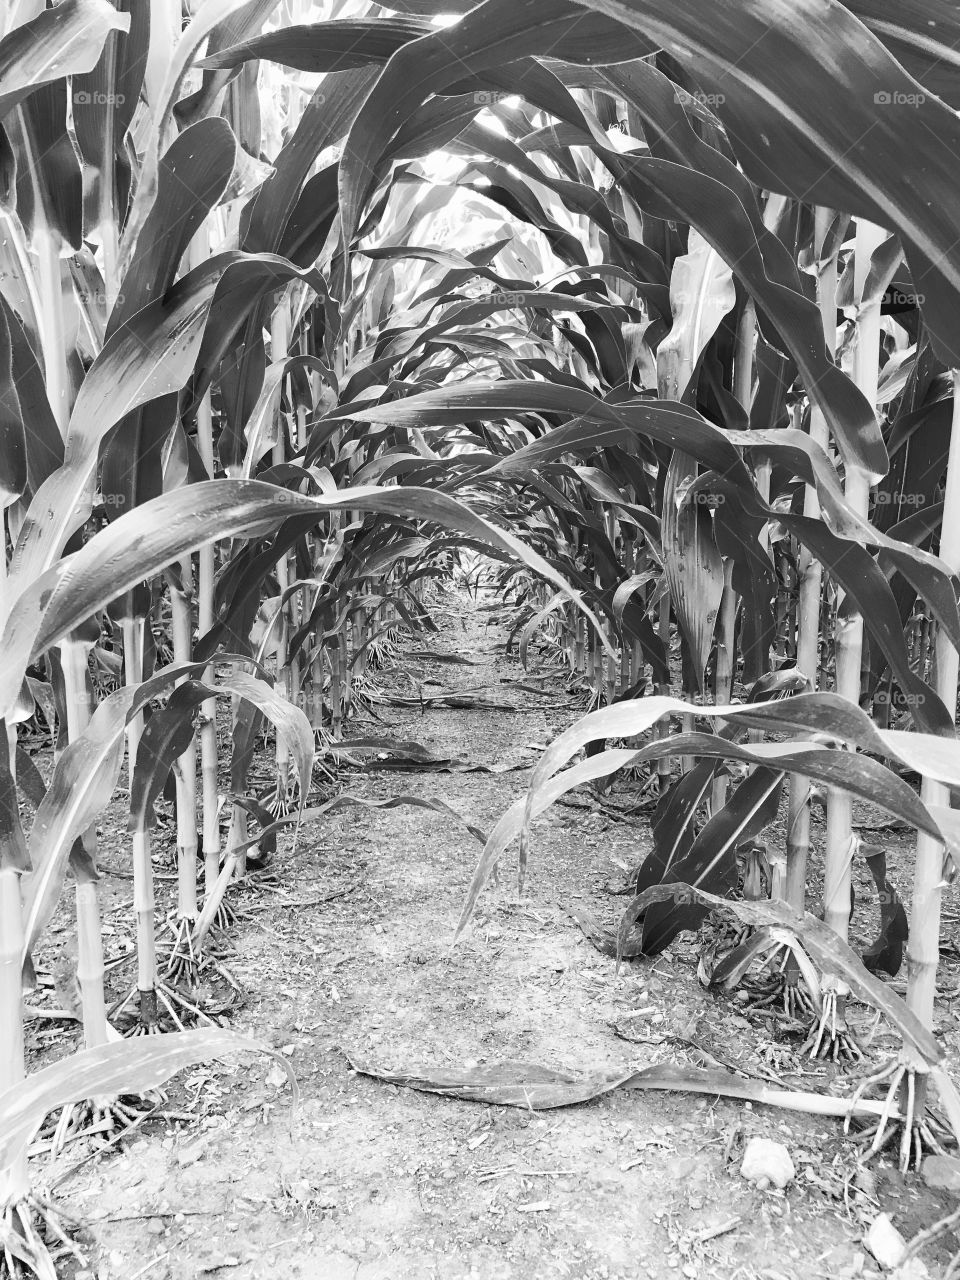 If crops were devoid of color